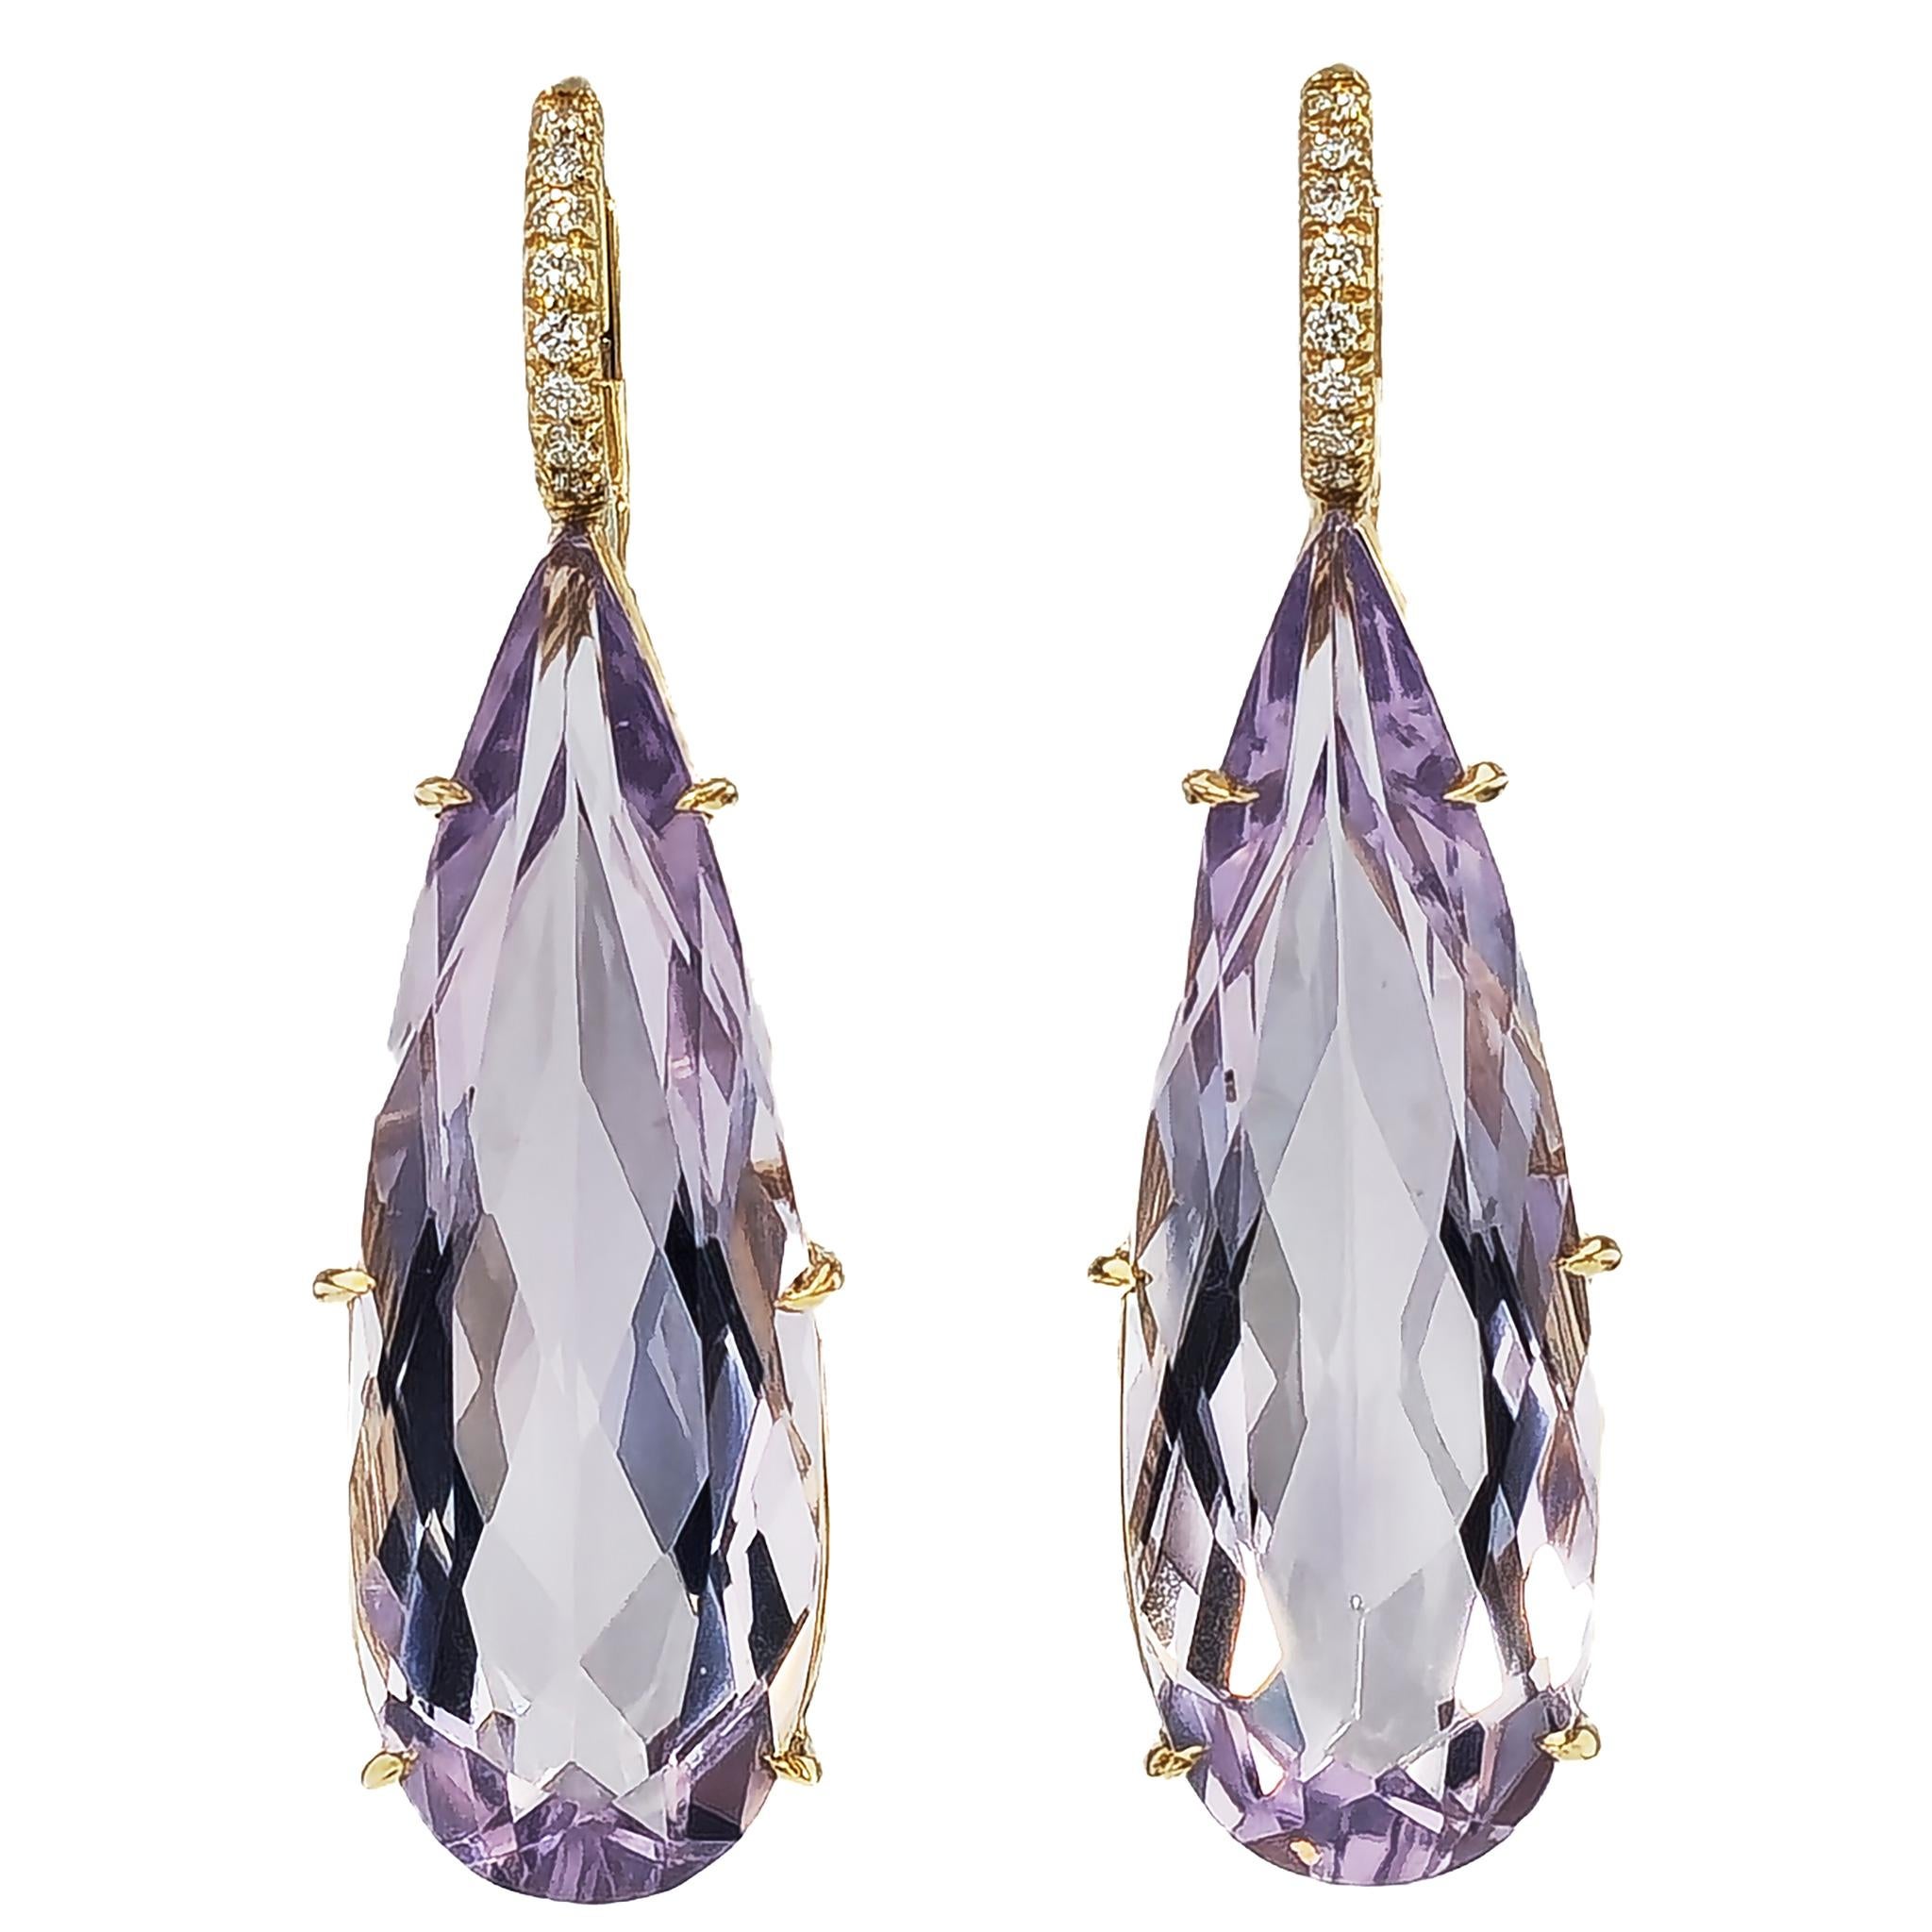 Be amazed by these sparkling 2 pieces of Rose De France amethyst drop earrings.  They are a total of 37.65 carats and are pear shaped. They are handcrafted in 18 karat yellow gold. They are finely adorned by 0.15 carats of F/G VS1 diamond pave set